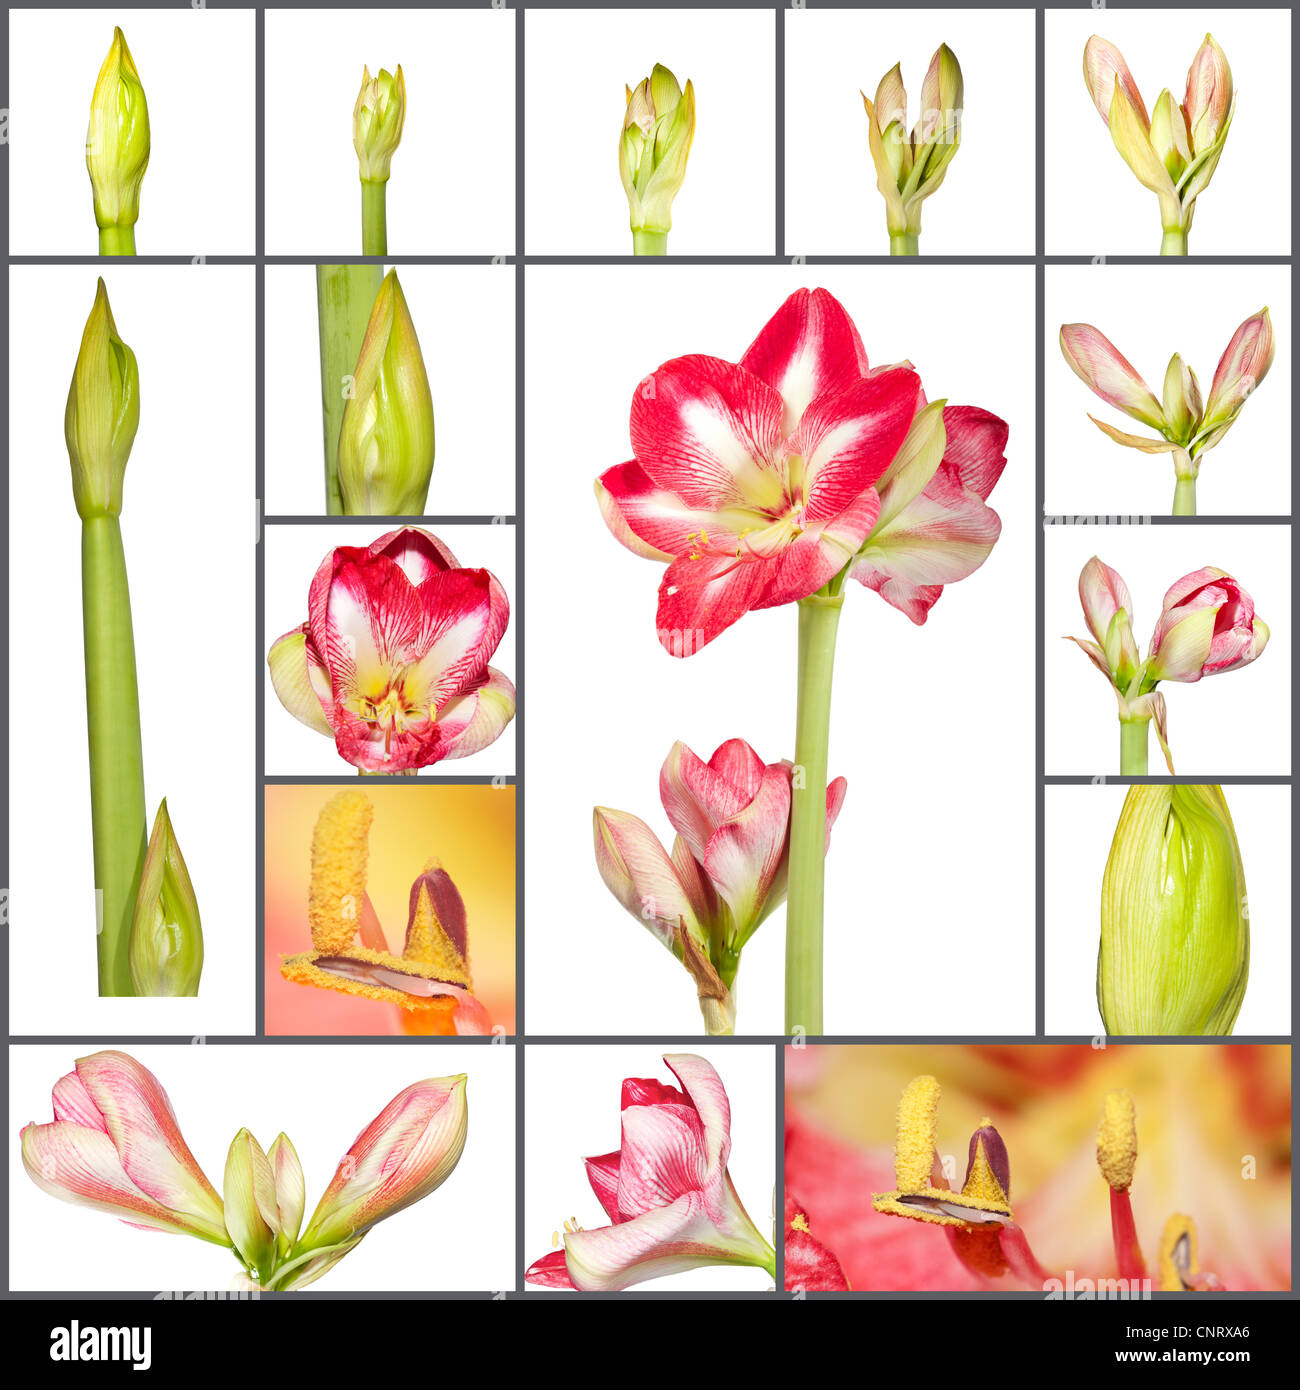 Collage of an amaryllis plant growth phases on white background Stock Photo